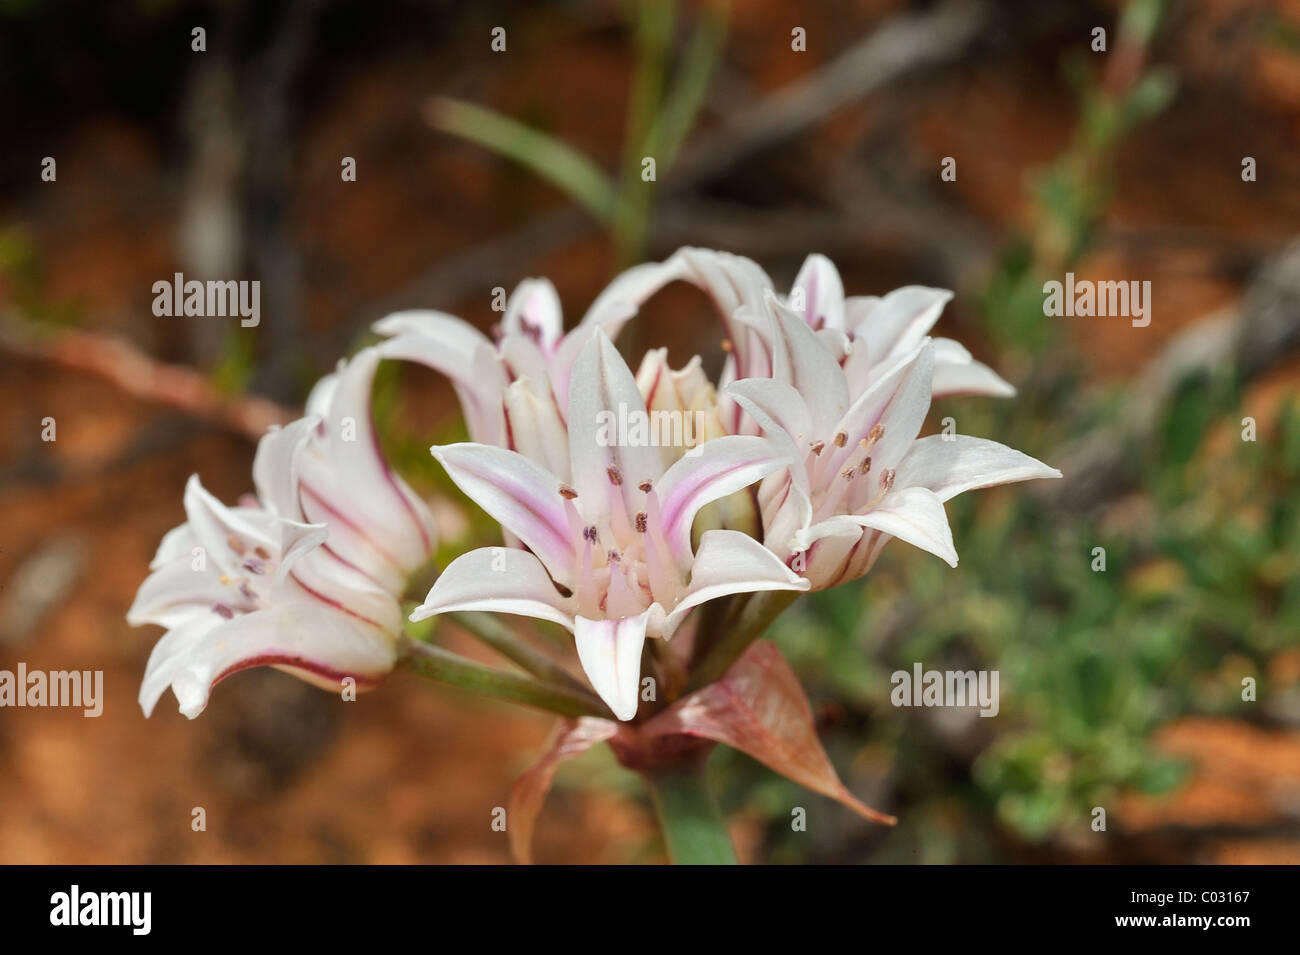 Lily flowers growing in Canyonlands National Park, Utah, USA Banque D'Images